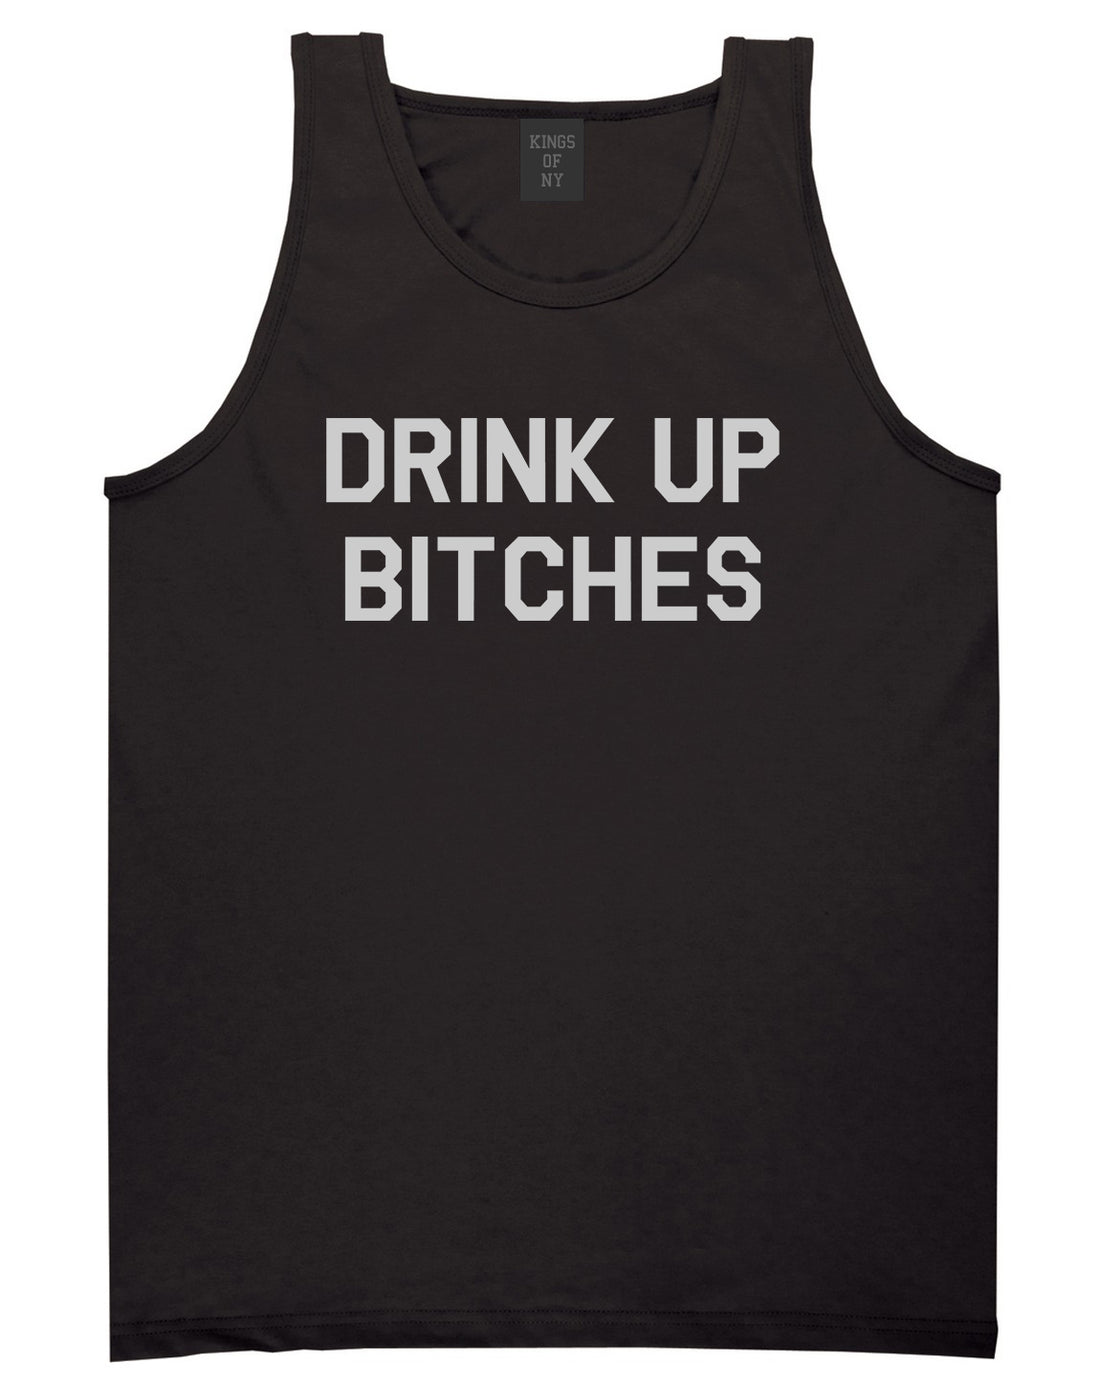 Drink_Up_Bitches Mens Black Tank Top Shirt by Kings Of NY